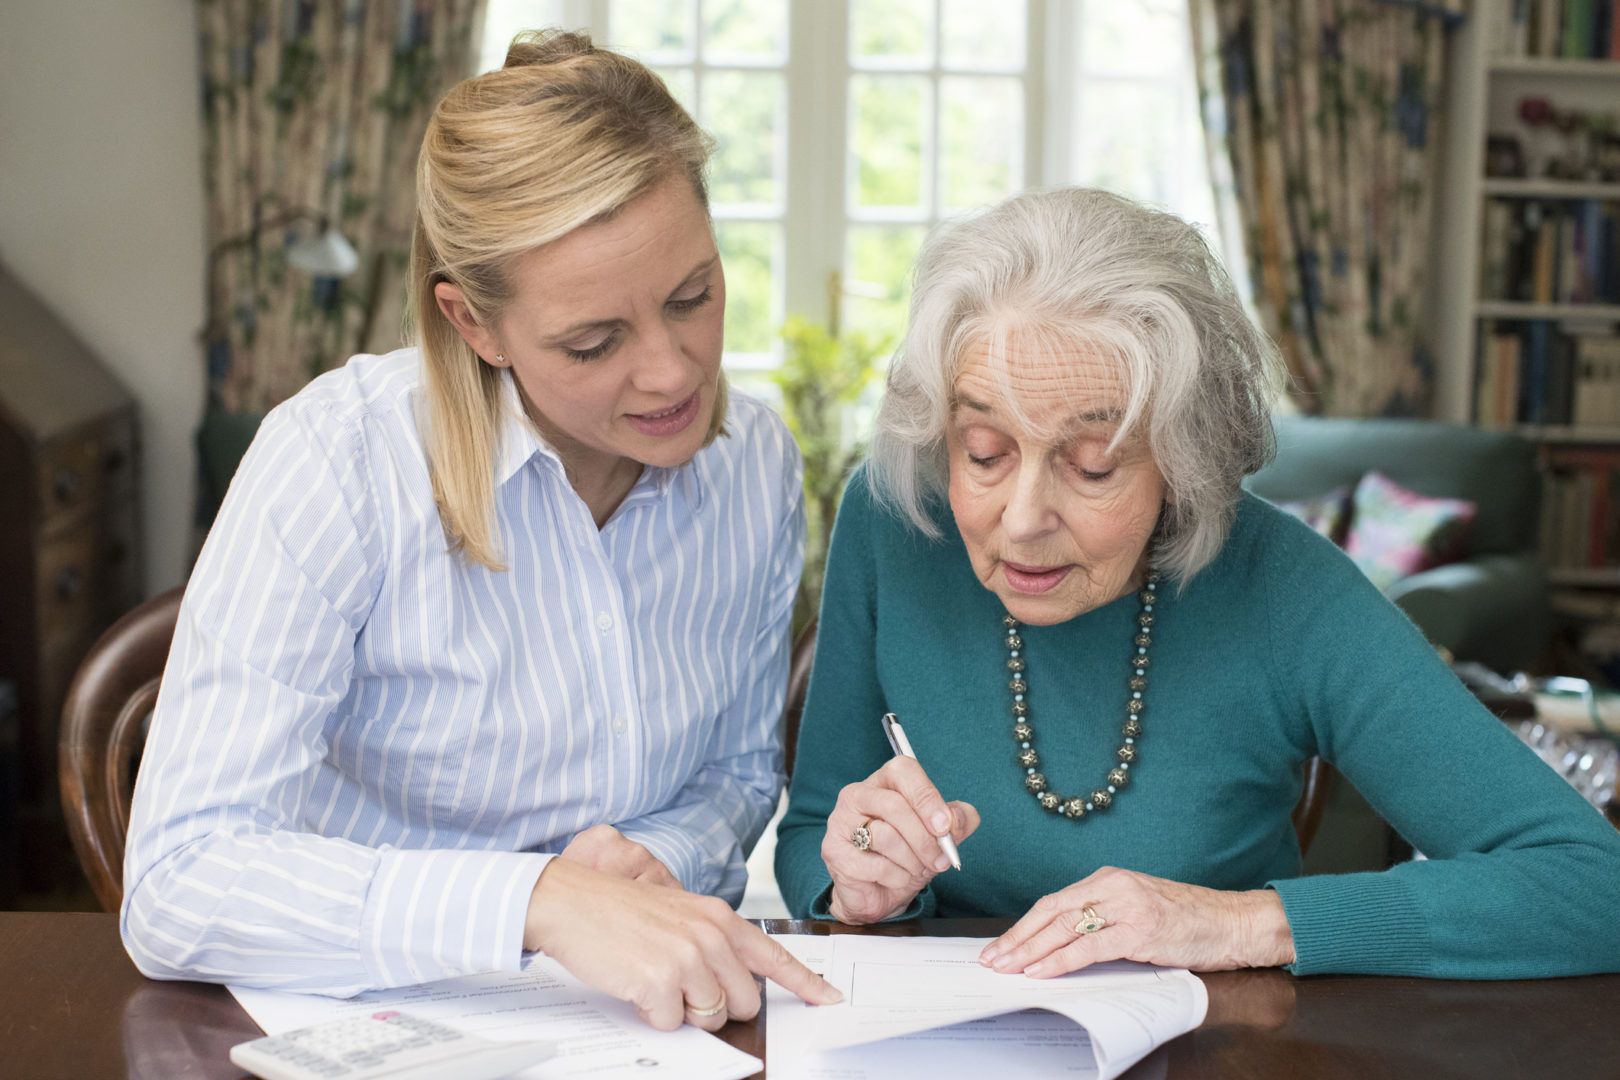 Watch out for these hidden costs of assisted living